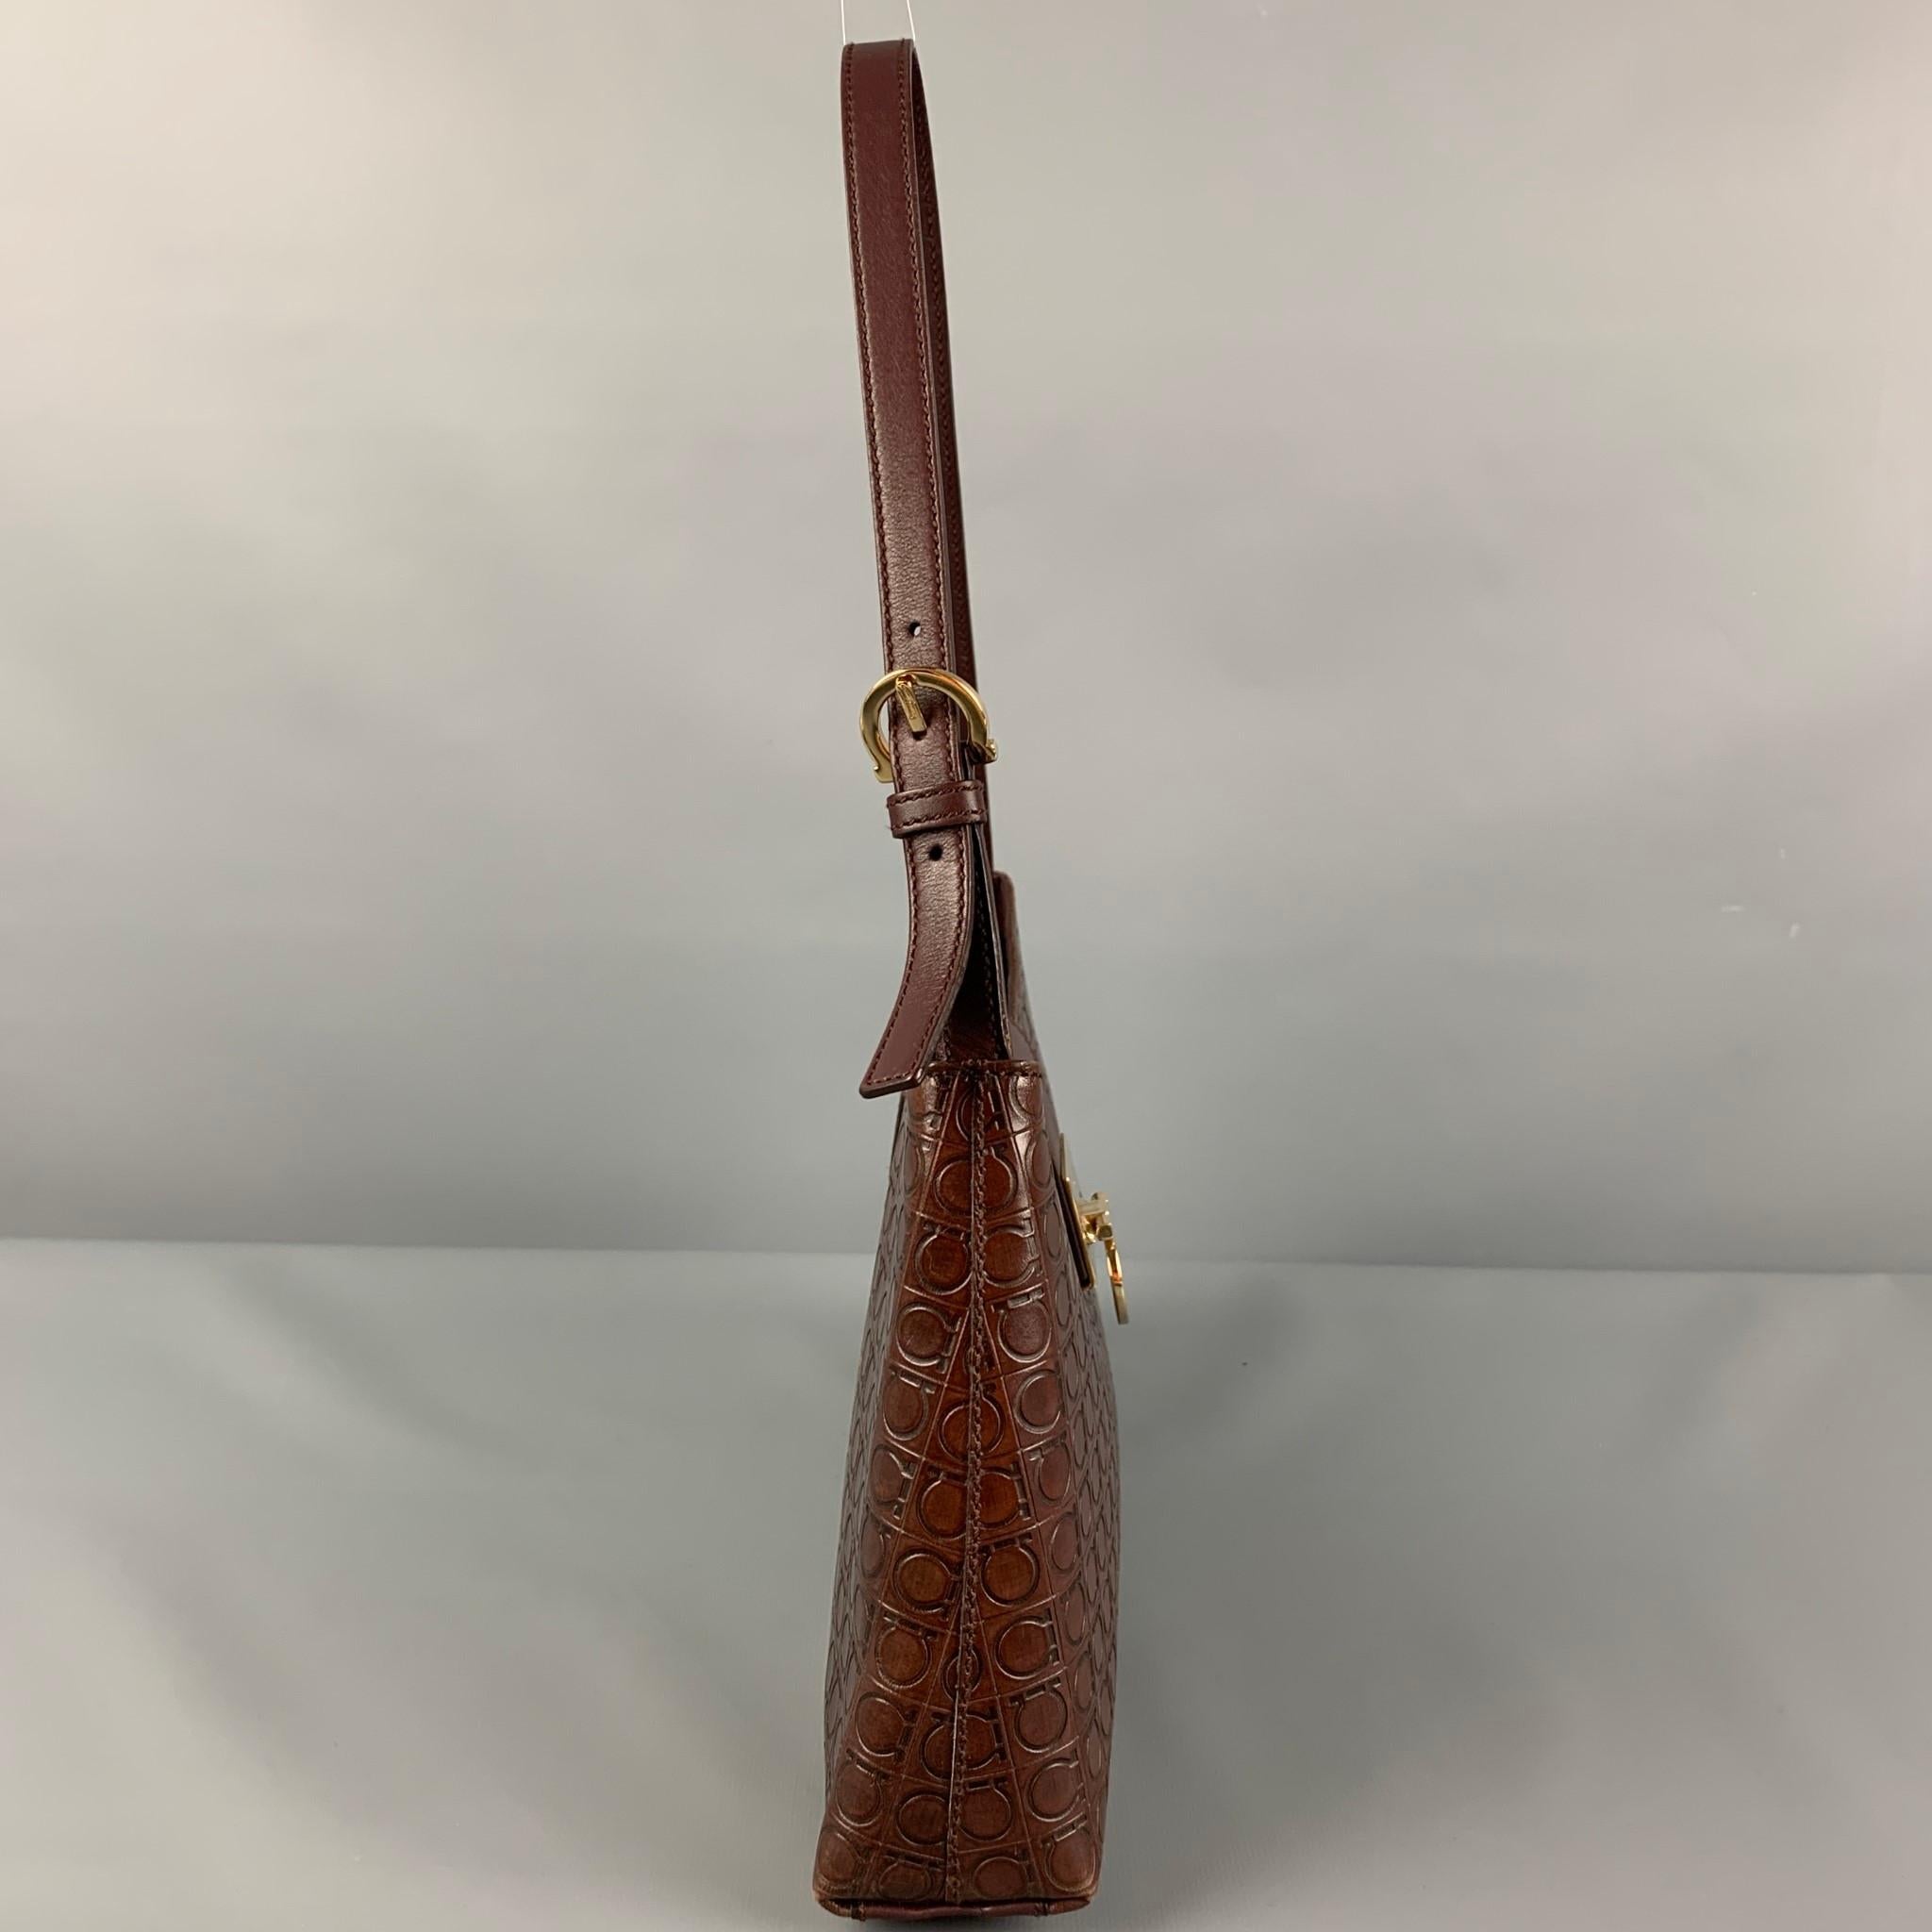 FERRAGAMO handbag comes in a brown embossed leather featuring a shoulder strap, gold tone hardware, and a turn lock closure. Includes authenticity cards. Made in Italy. 

Very Good Pre-Owned Condition.
Marked: D 21 2750

Measurements:

Length: 12.25